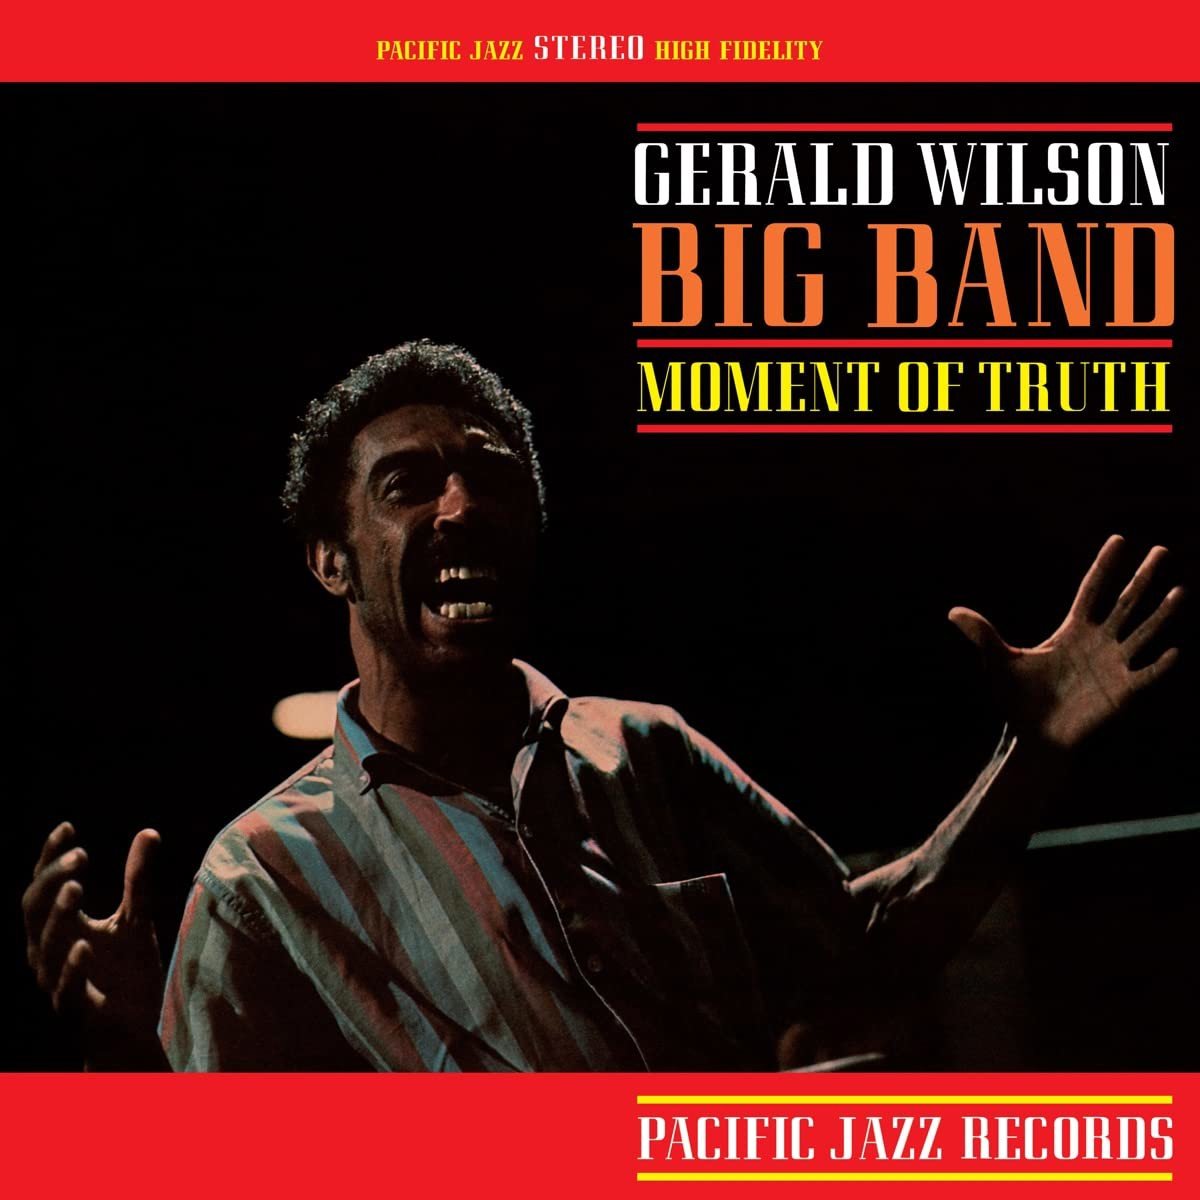 Gerald Wilson Big Band - Moment Of Truth (Tone Poet Series) (LP)